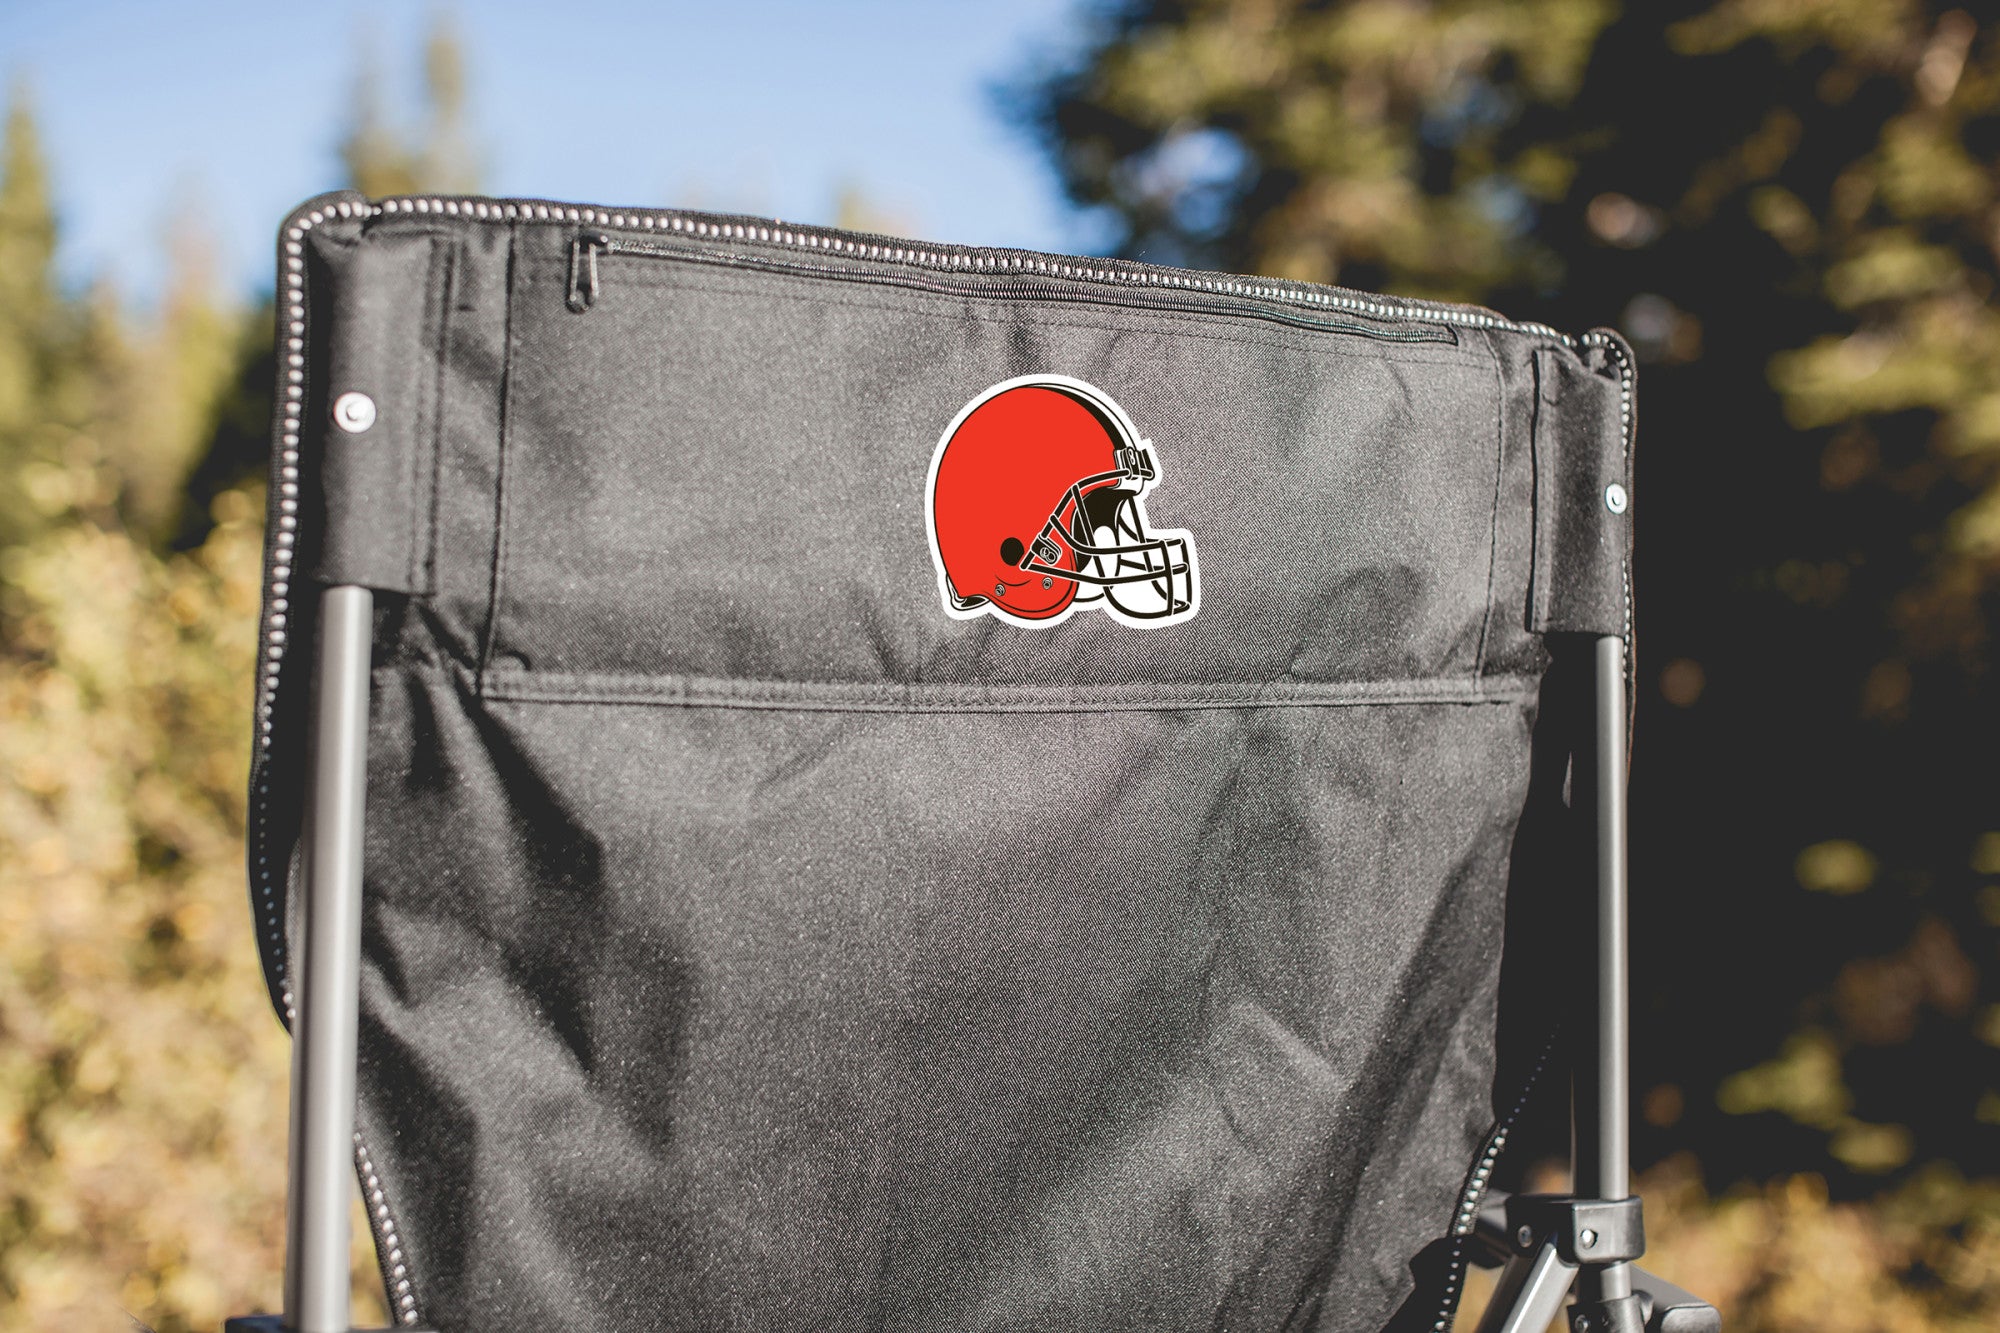 Cleveland Browns - Outlander XL Camping Chair with Cooler